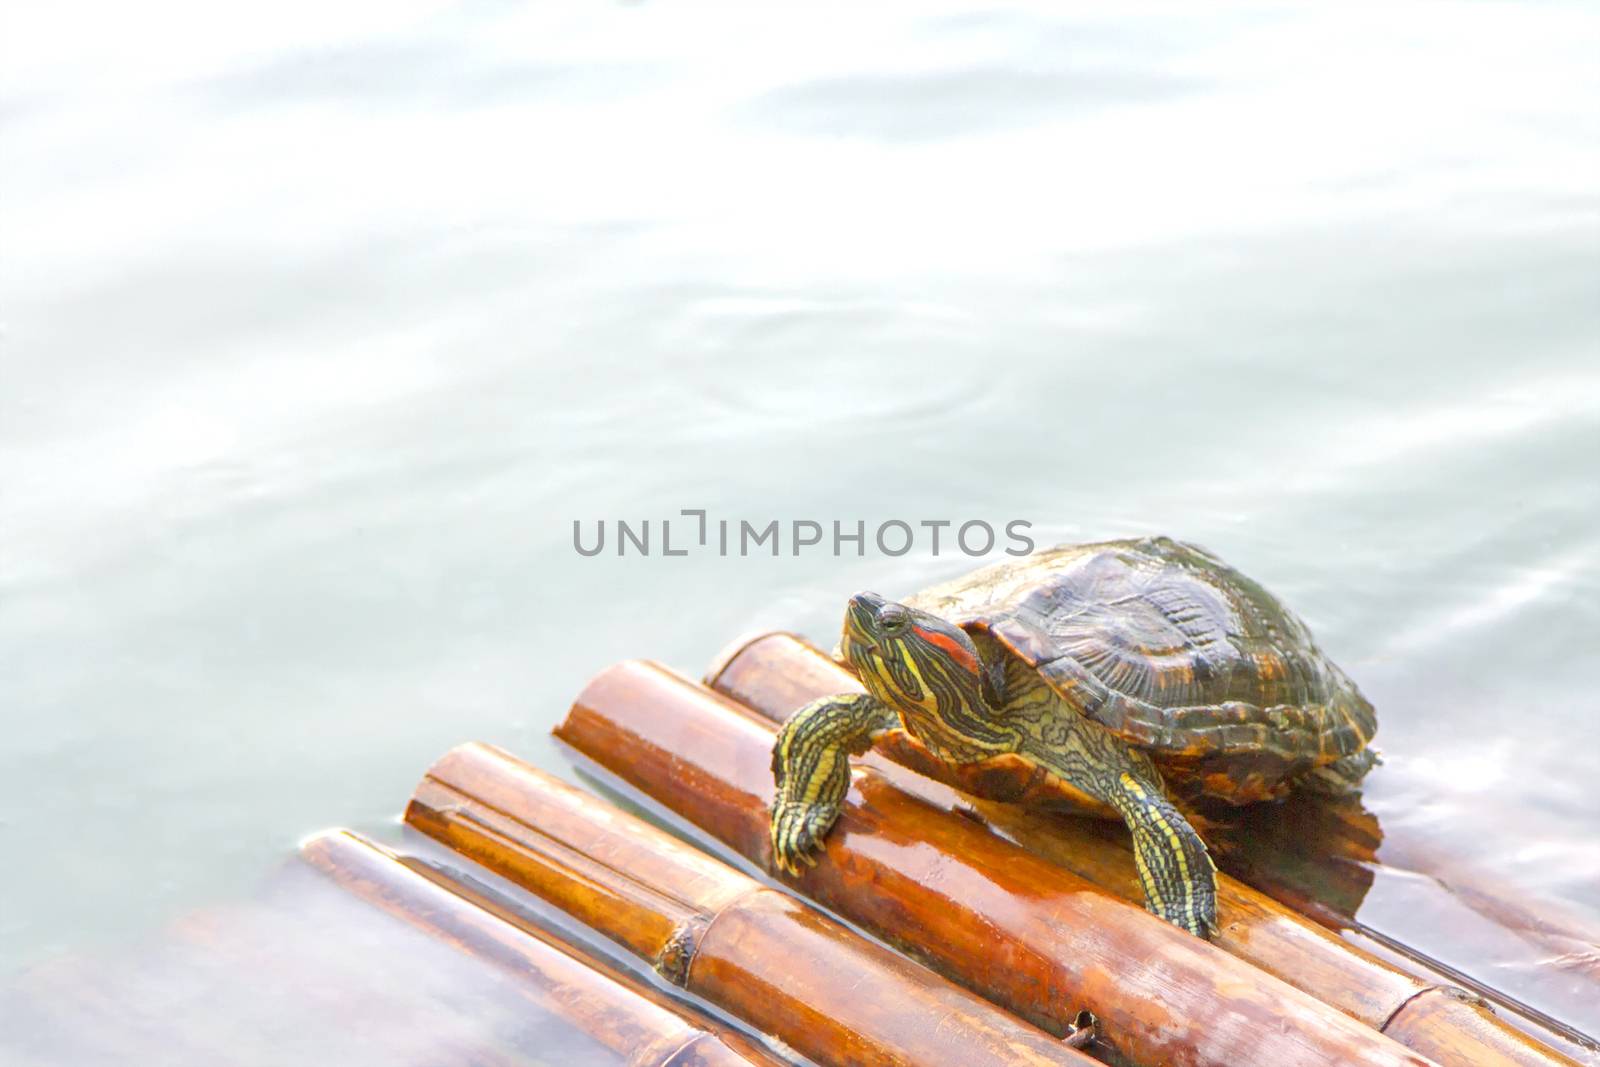 One turtle on bamboo raft in water